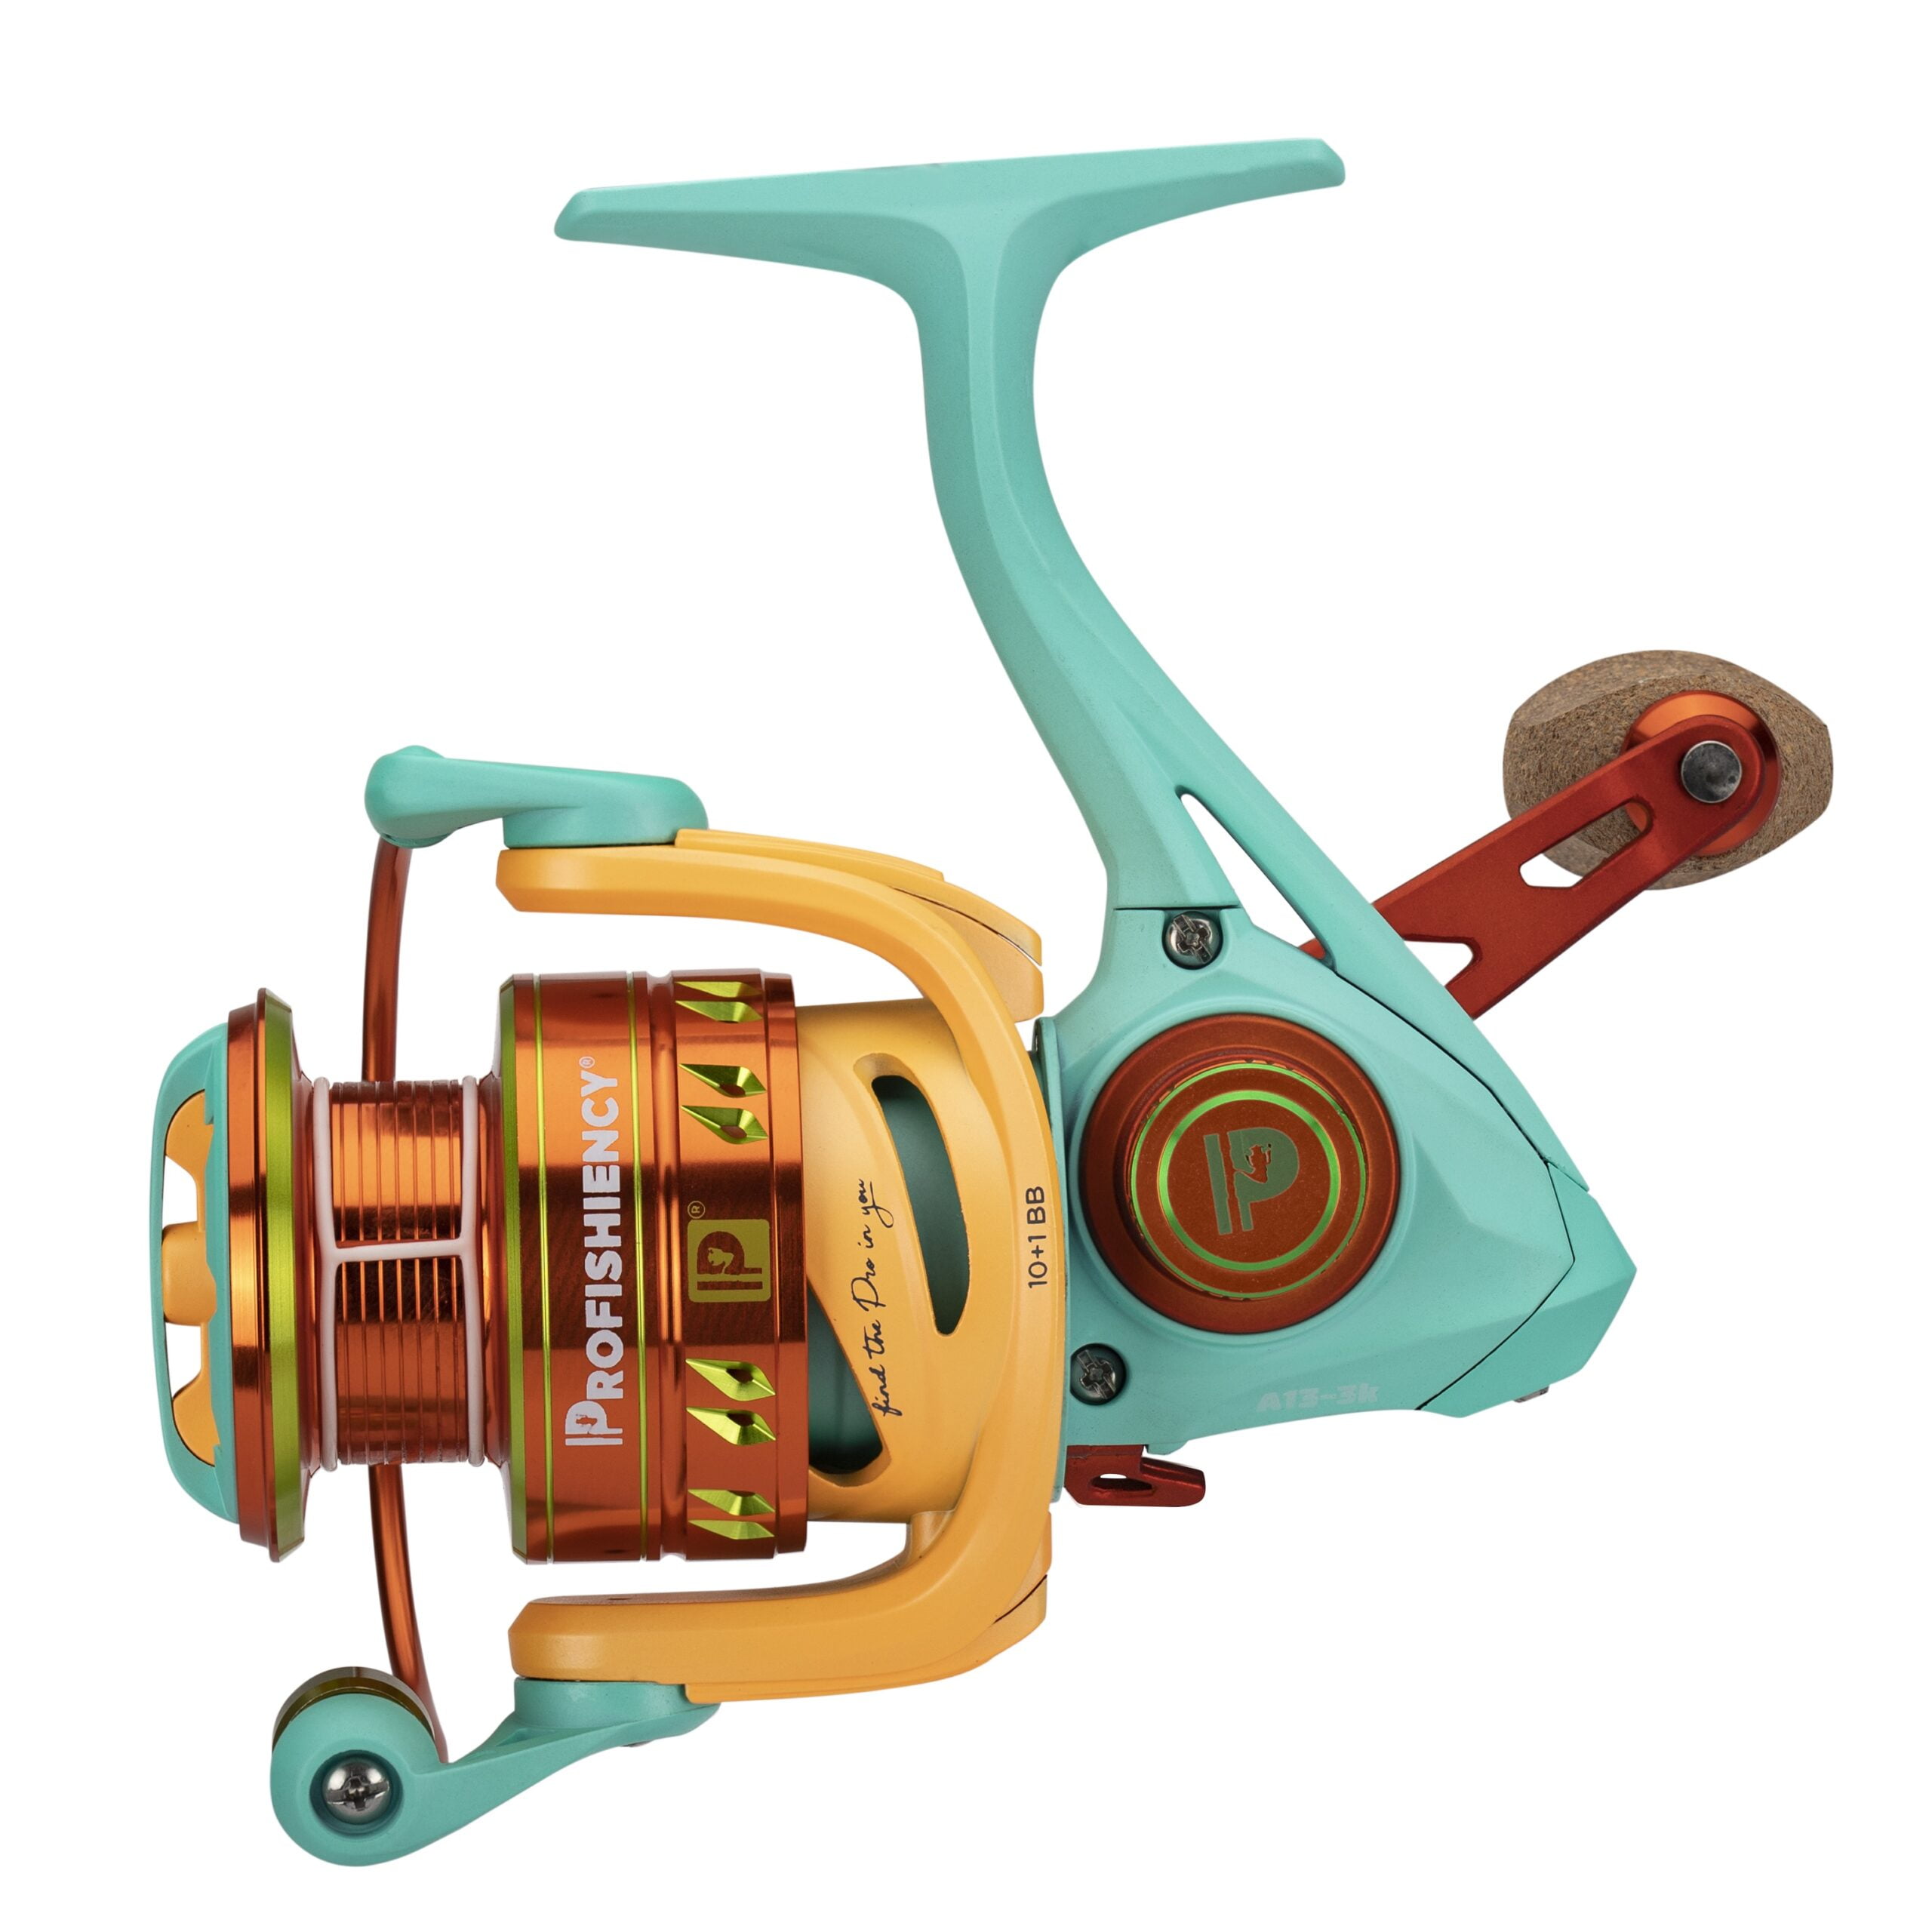 Profishiency Krazy3 Spin Reels from The Fishin' Hole